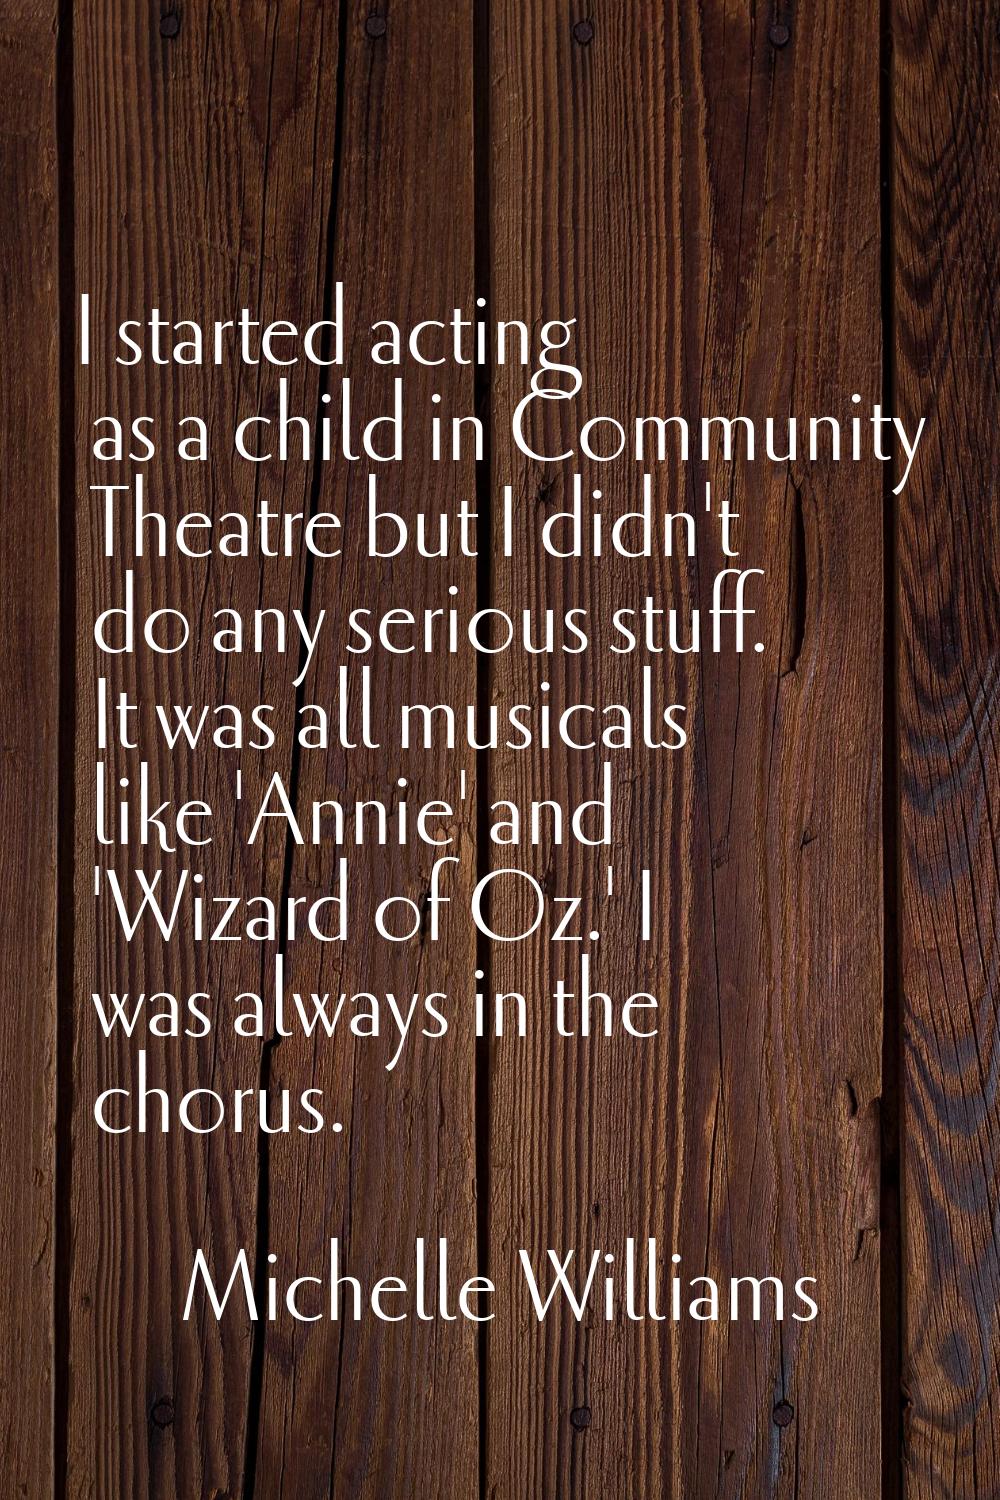 I started acting as a child in Community Theatre but I didn't do any serious stuff. It was all musi